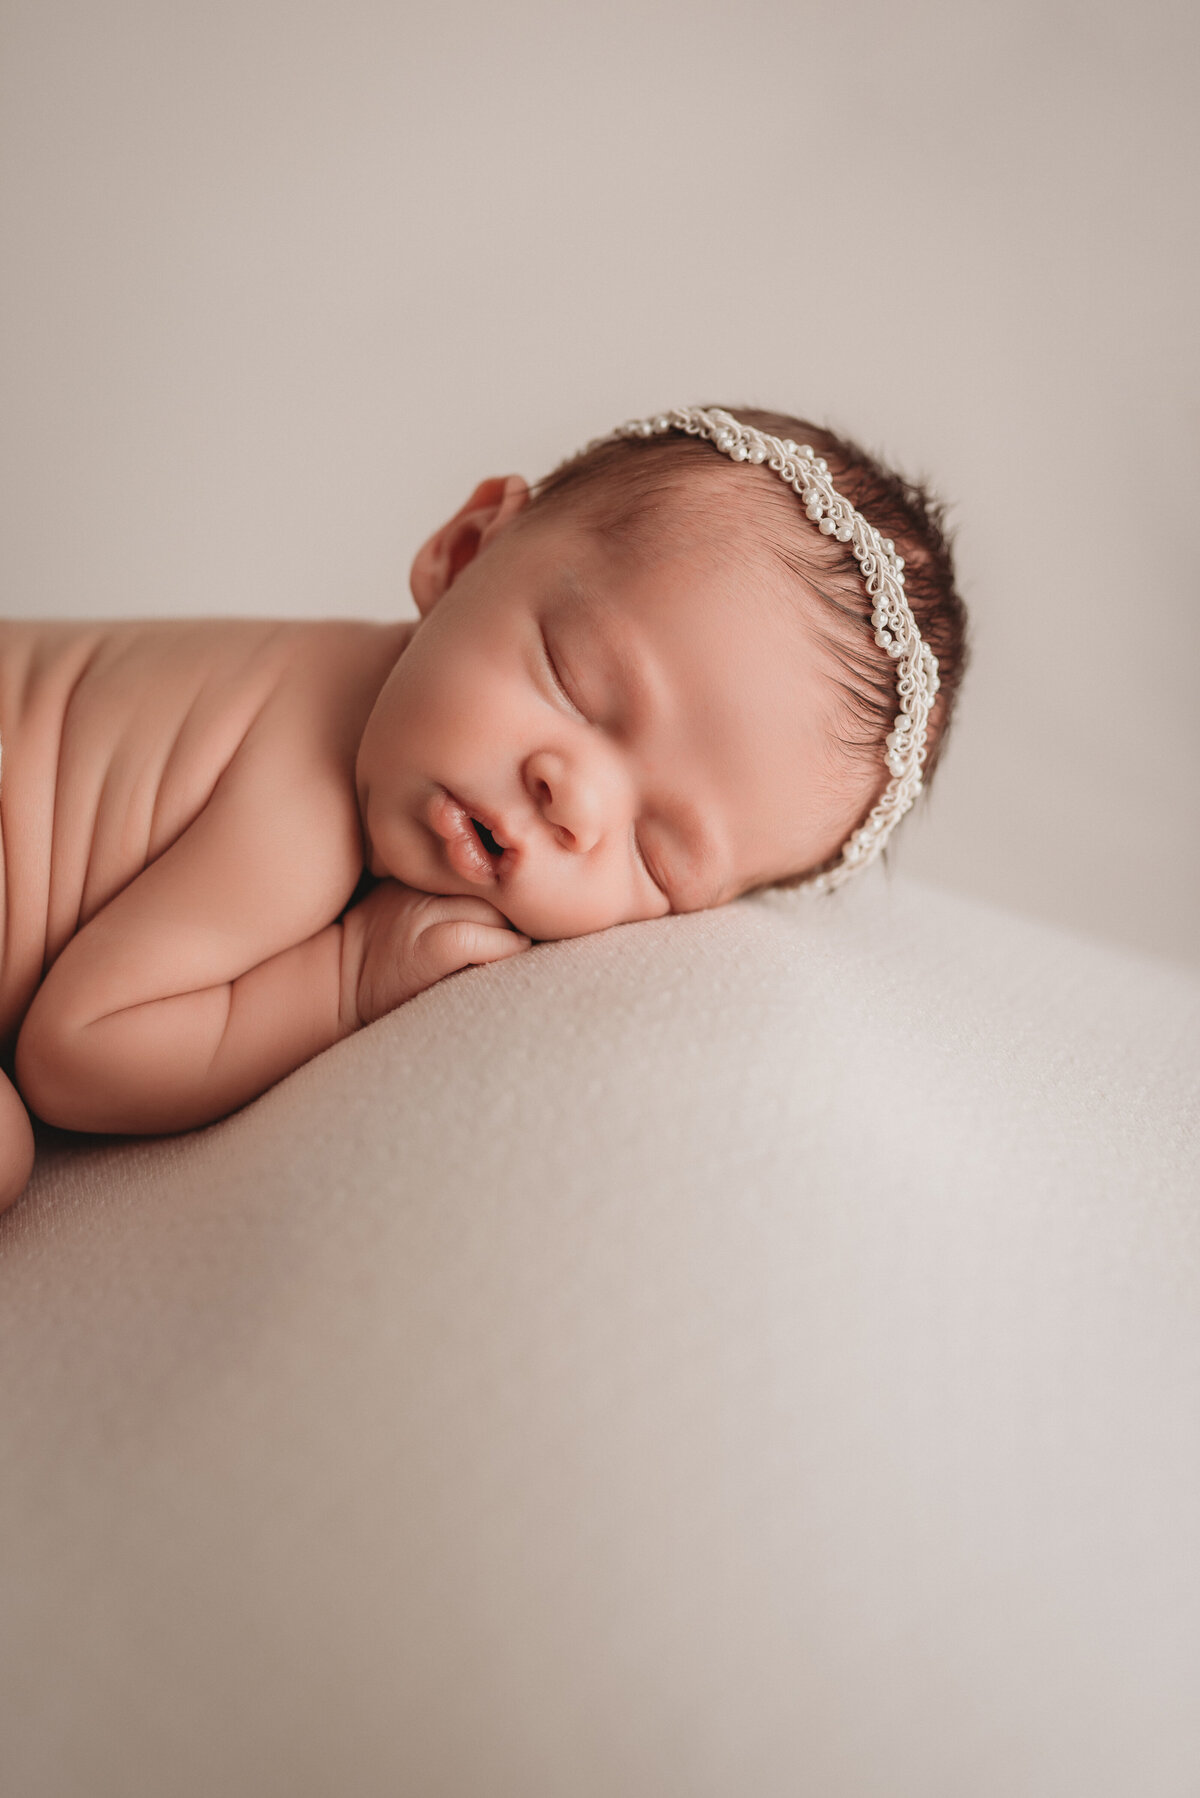 baby girl at her newborn portrait session at Marietta, GA newborn photography studio sleeping and curled up while posing for her newborn portrait